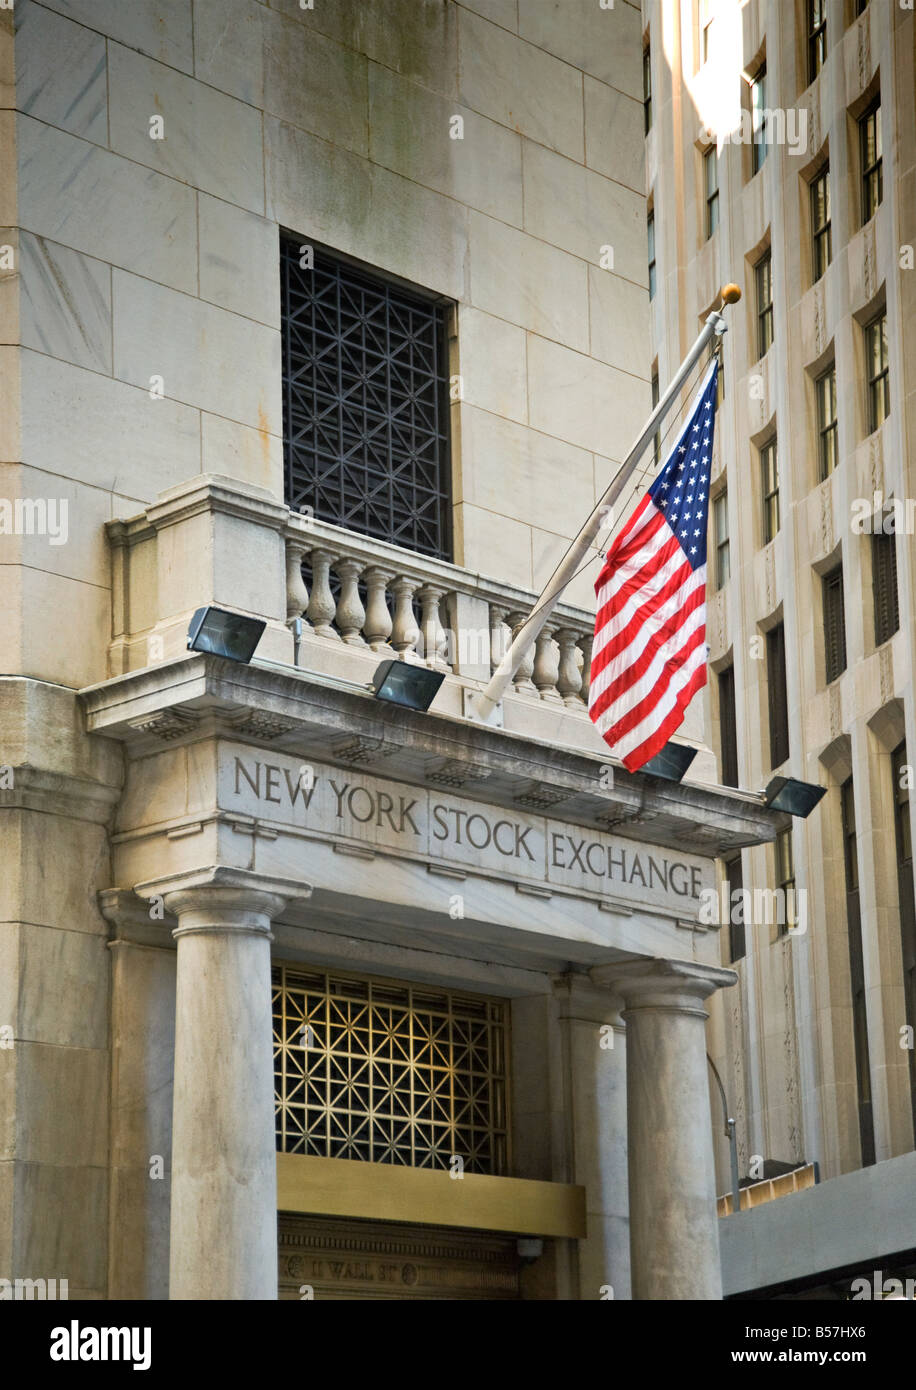 Stars & Stripes flies over a side entrance to the New York Stock Exchange Stock Photo